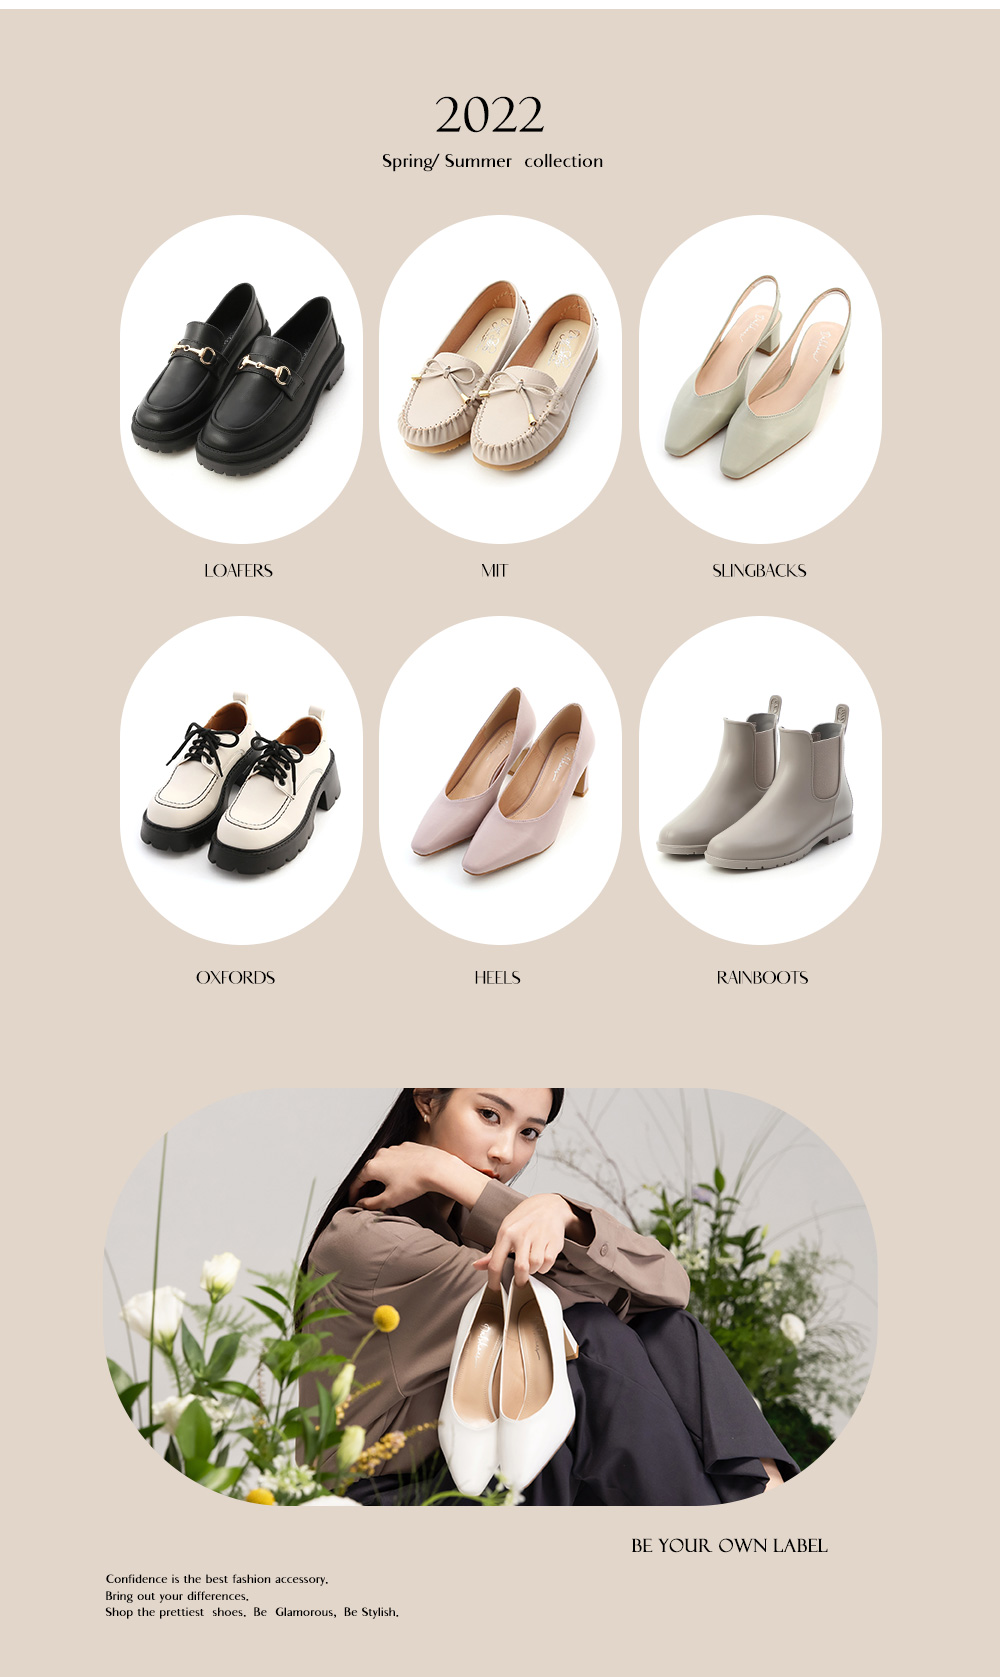 Your everyday shoes collection - all kind of trendy shoes including sandals, pumps, boots, heels,.